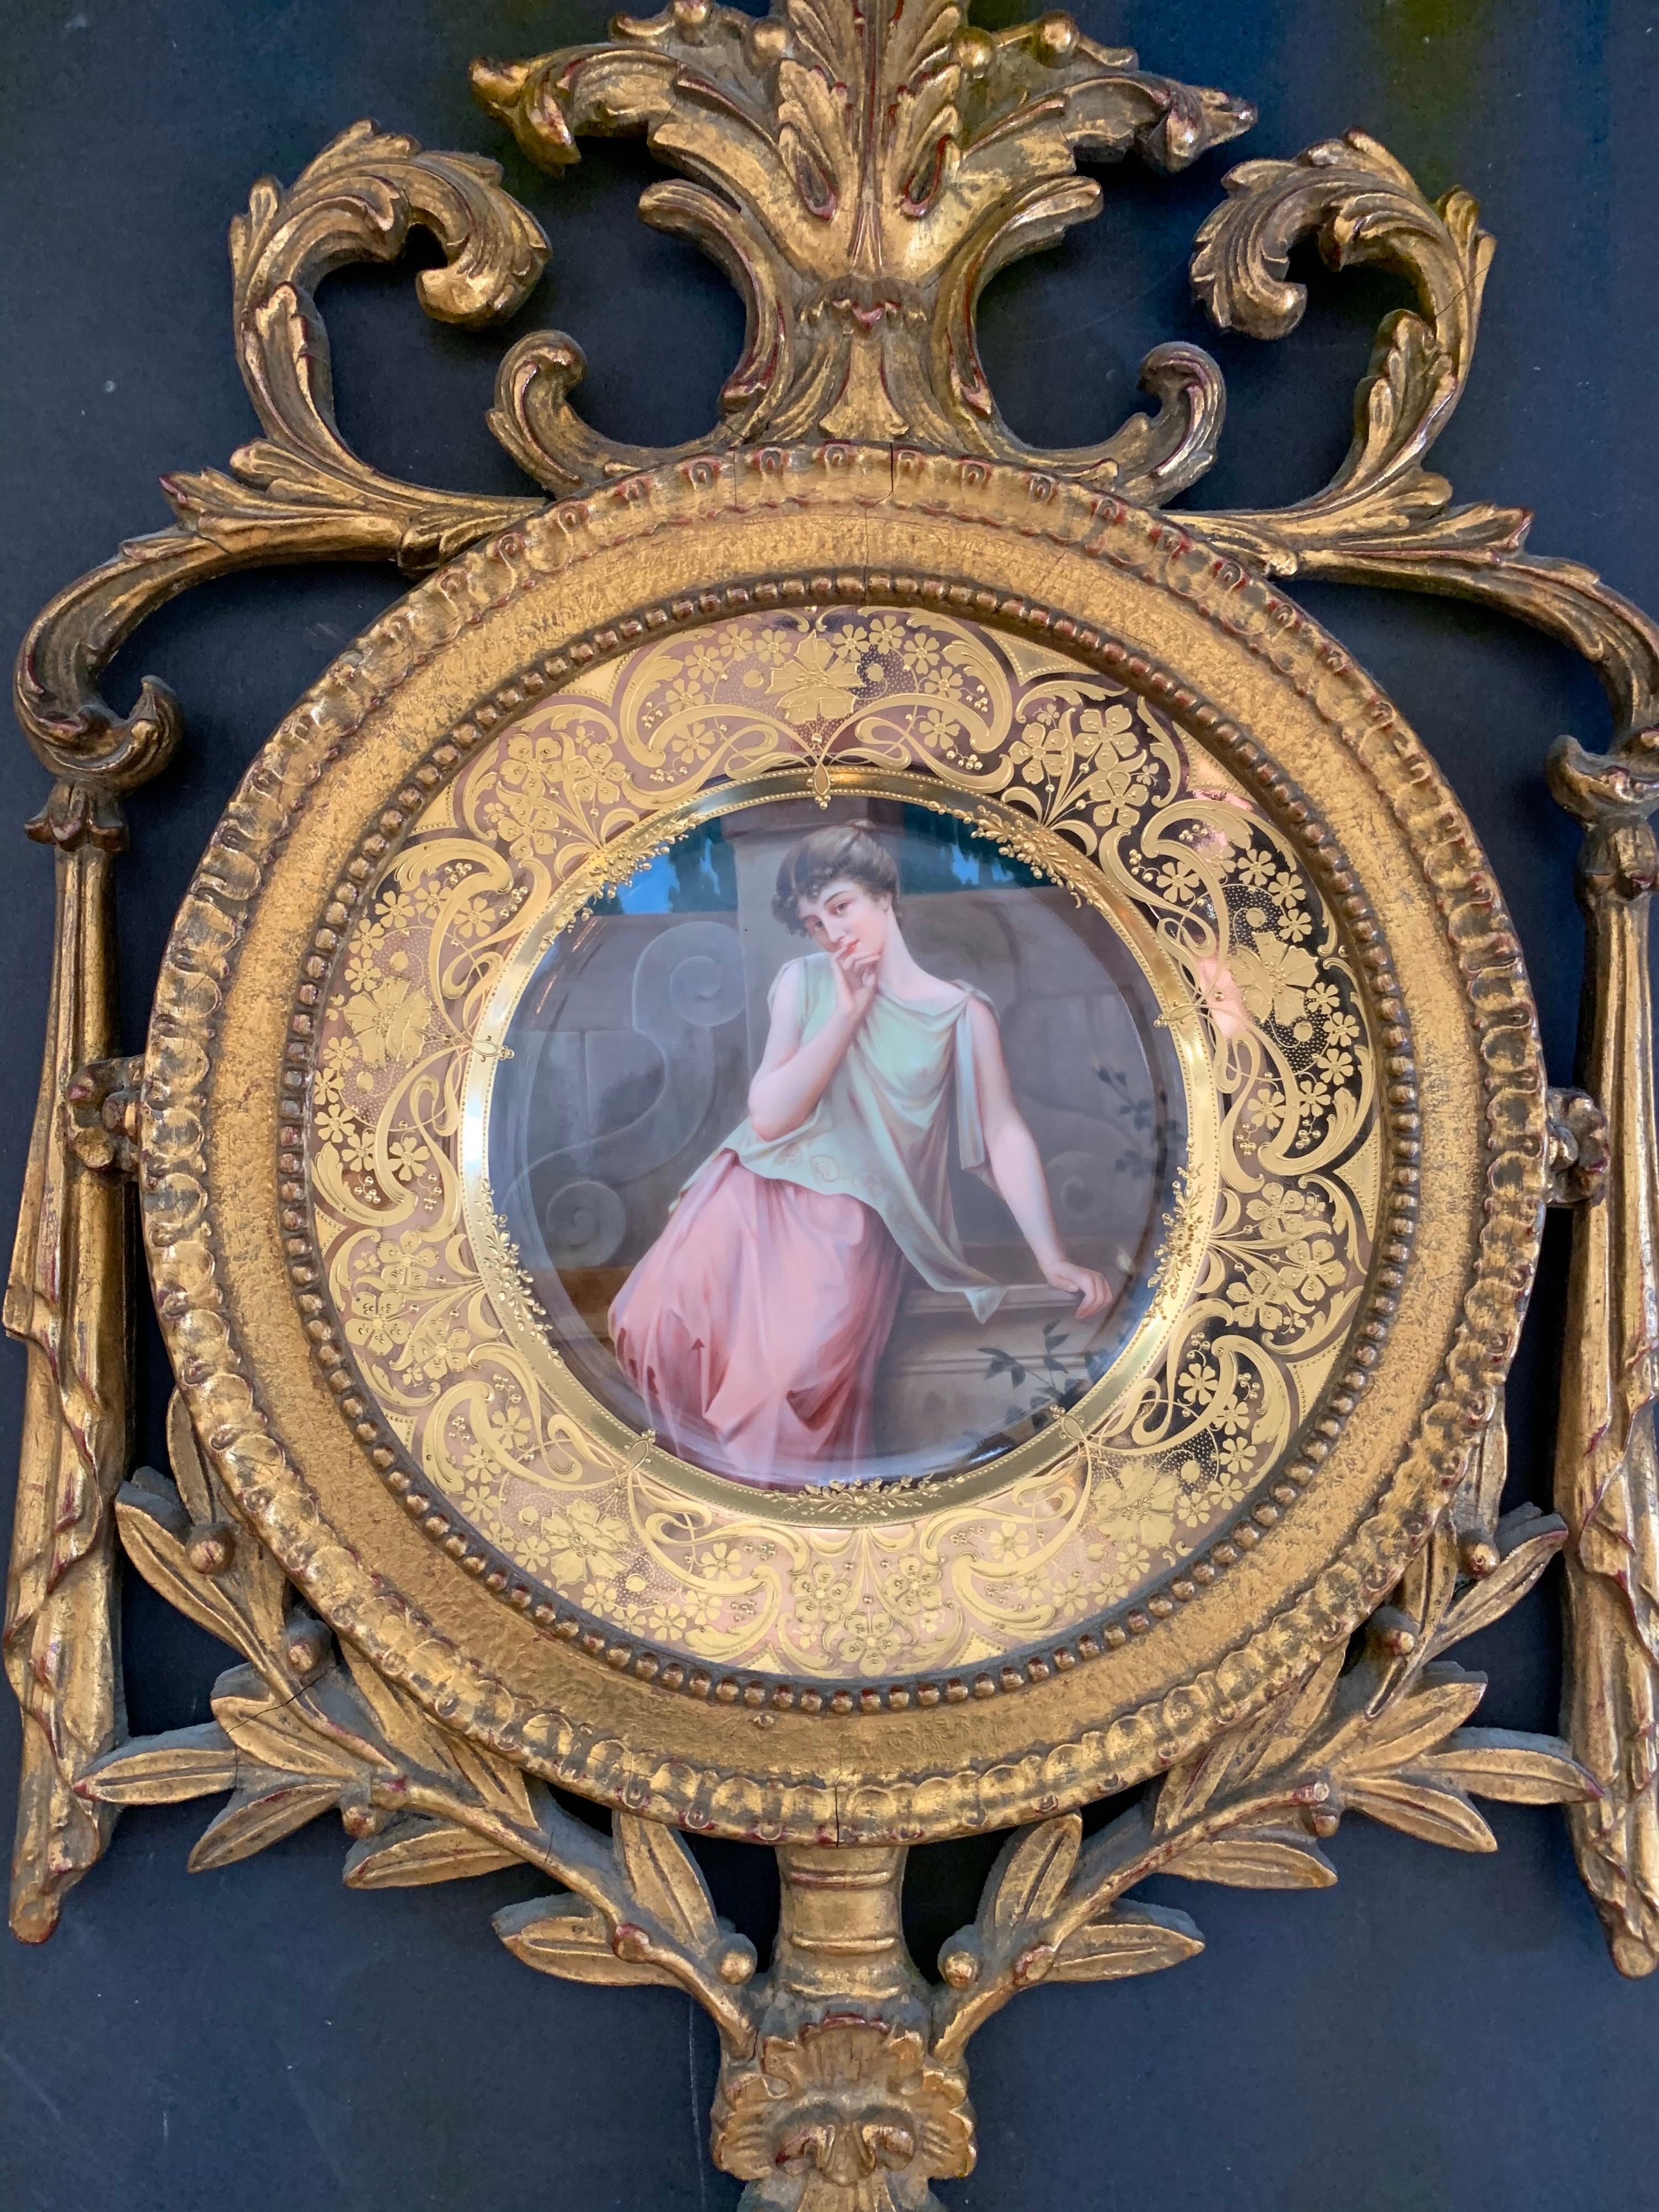 Wonderful royal Vienna porcelain portrait plate giltwood frame
Signed on the back Erwartung with a bee hive and Germany below.